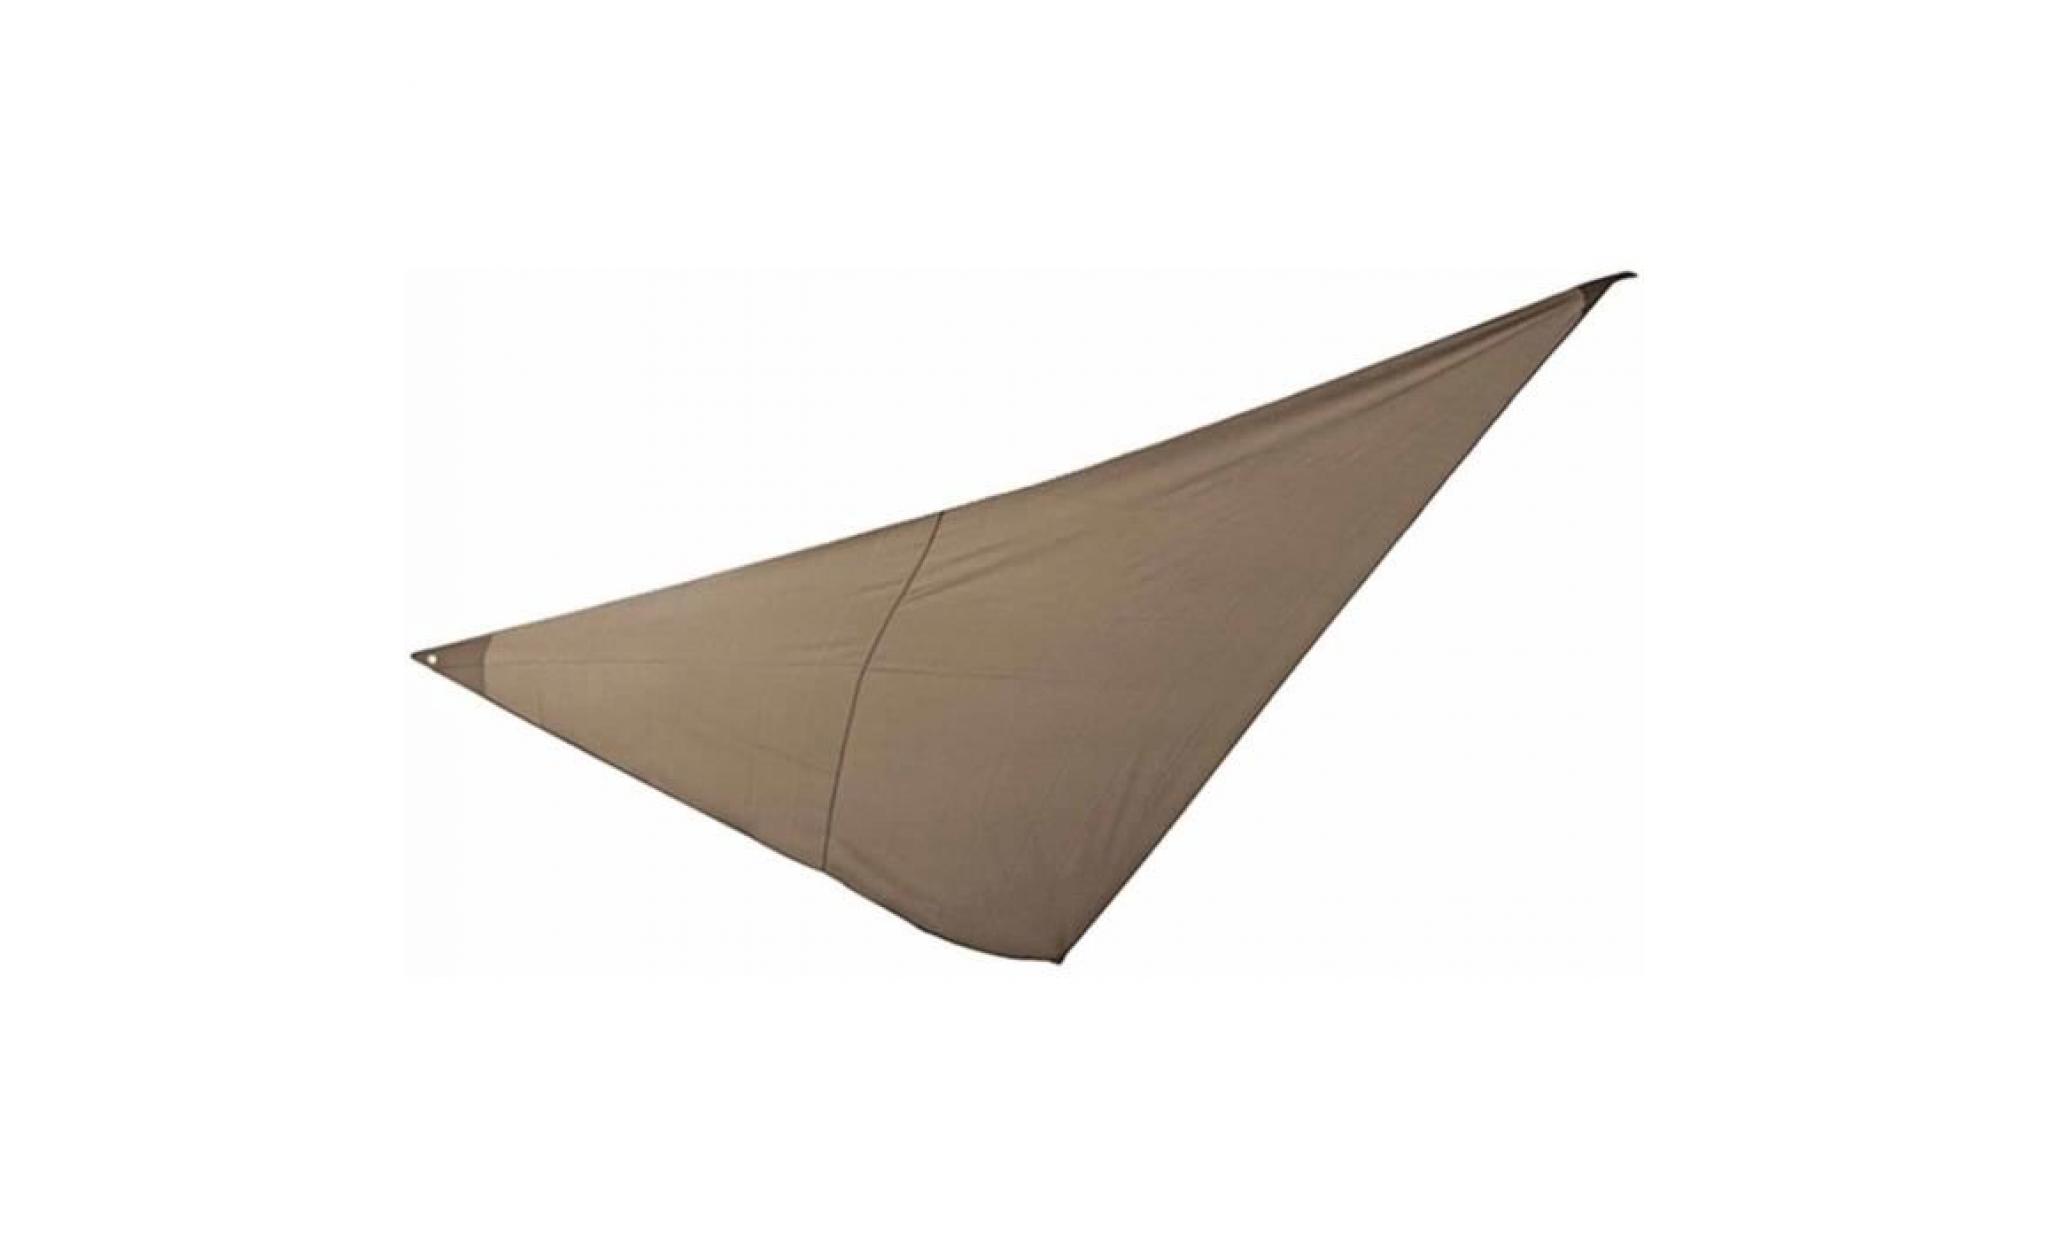 voile d'ombrage triangulaire en polyester coloris taupe   dim : 4 x 4 x 4 m